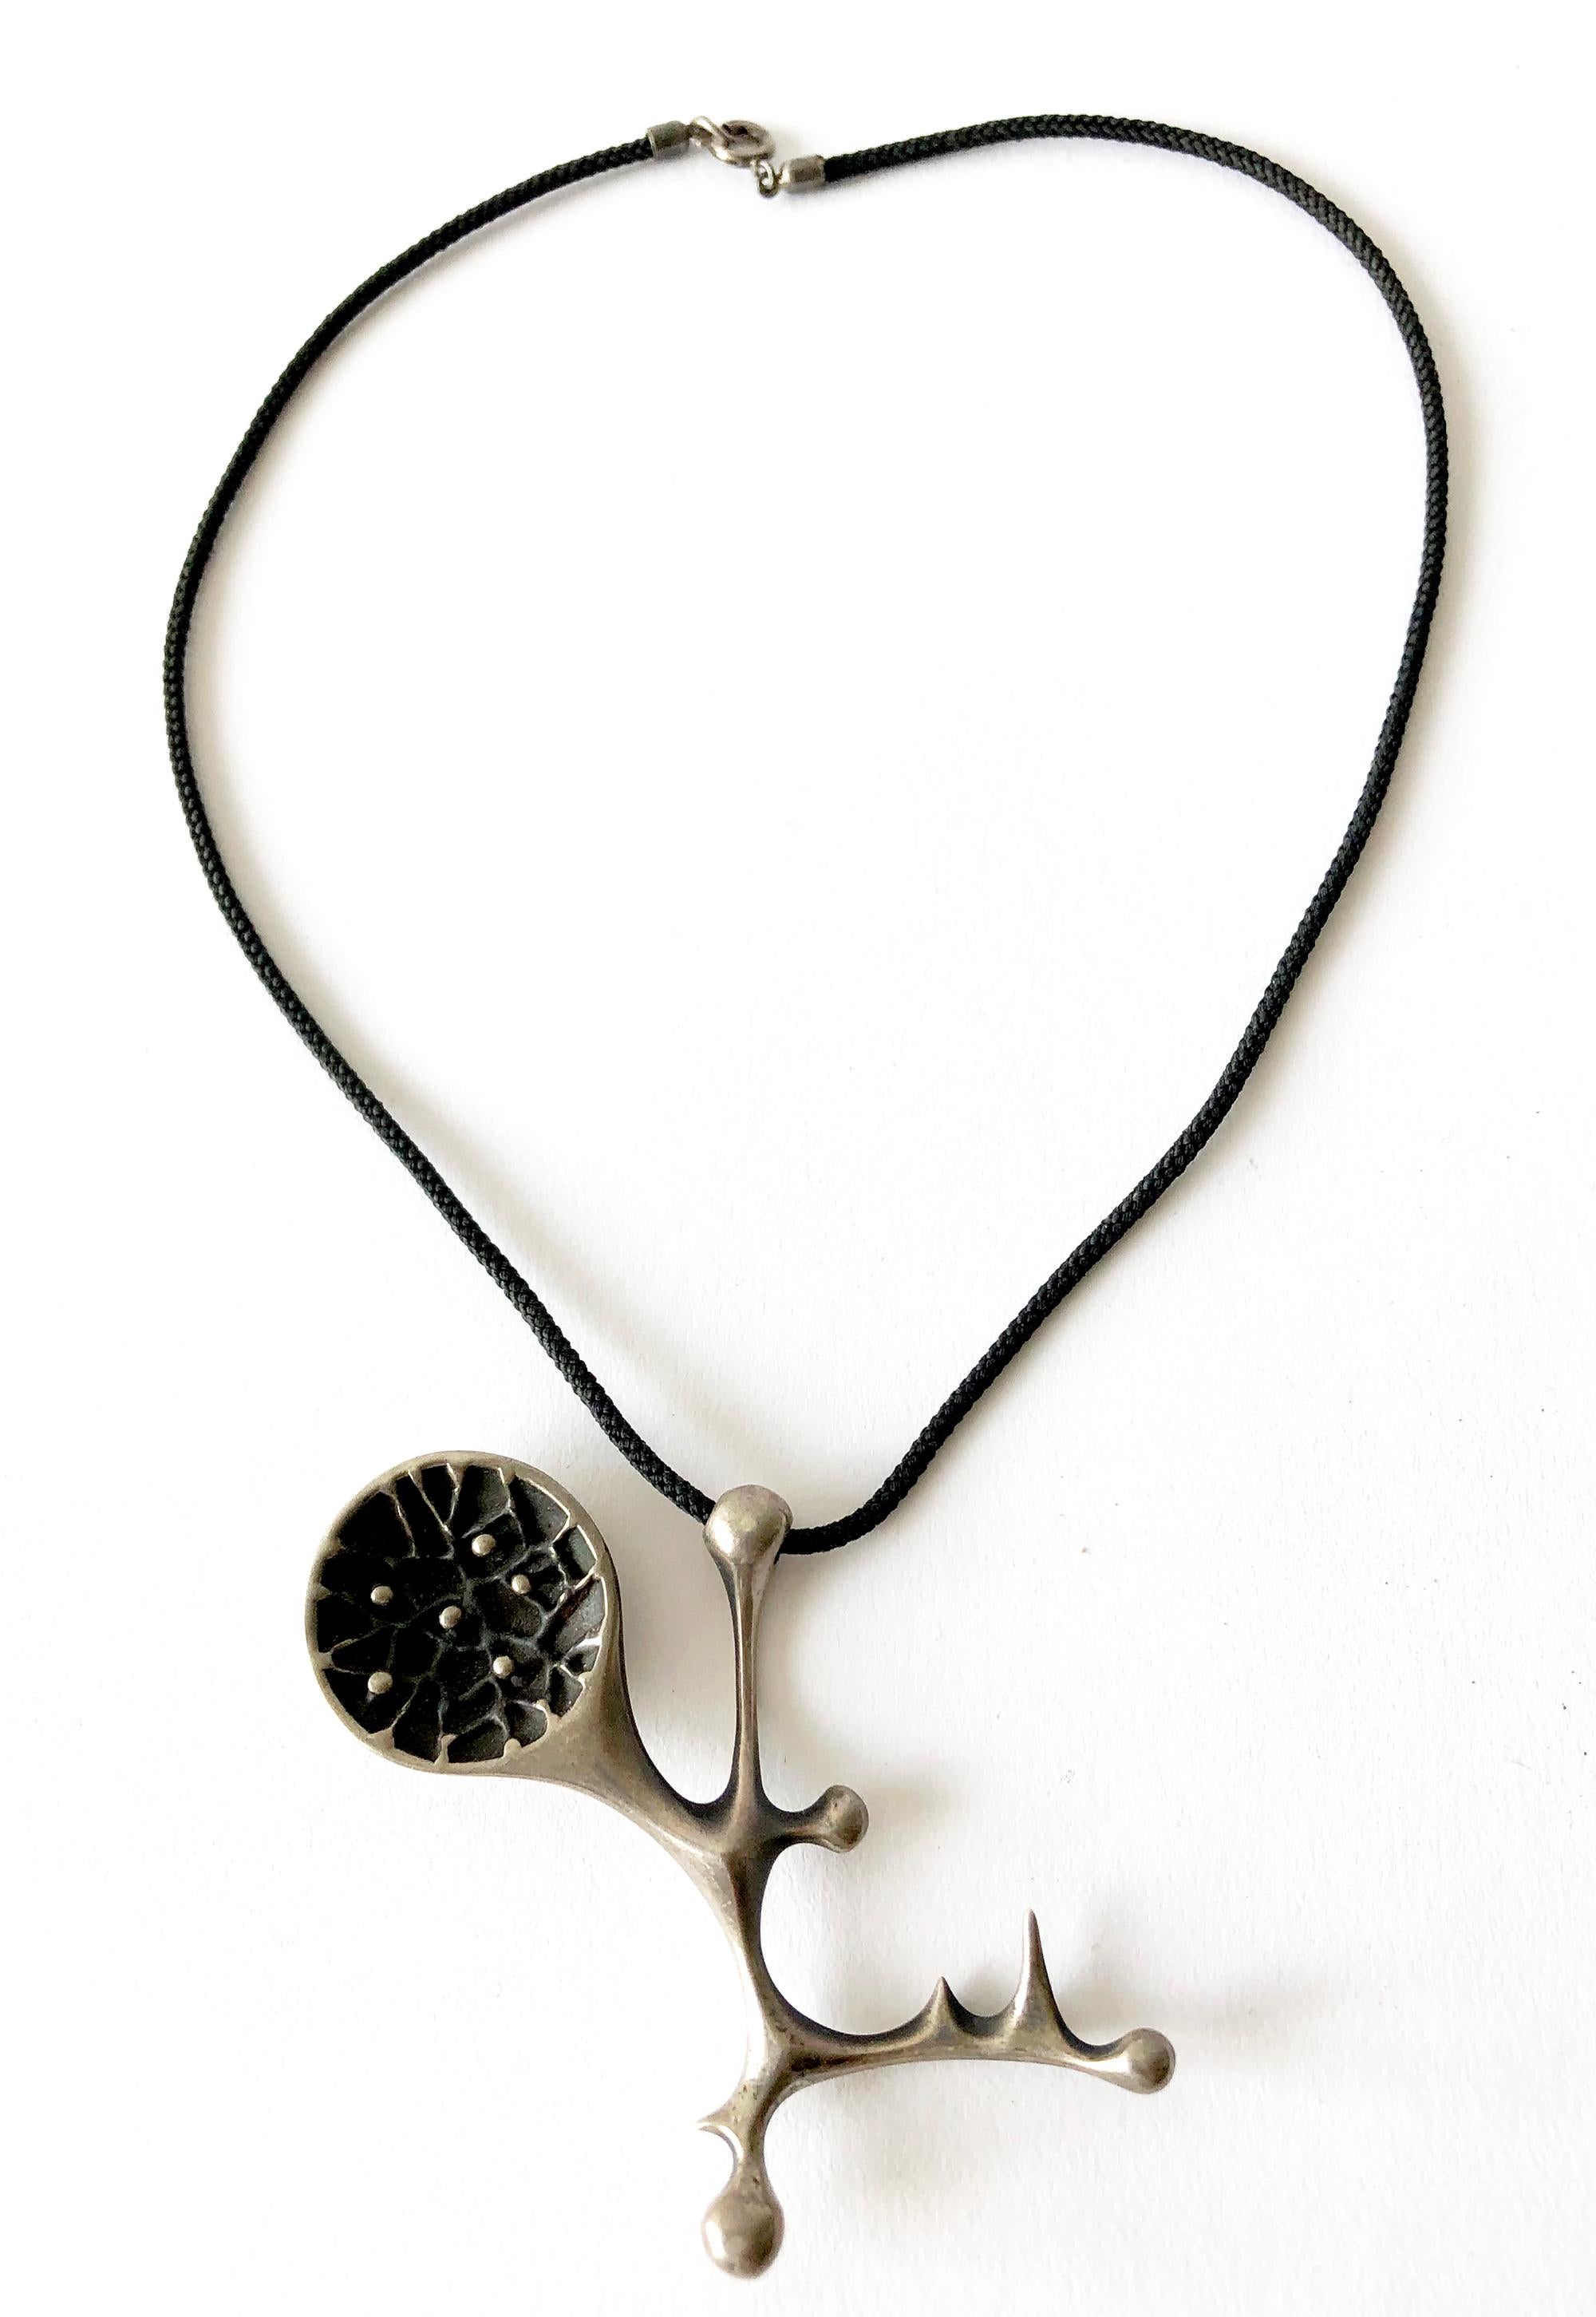 Cast sterling silver abstract modernist pendant created by Donald B. Wright, circa 1950s.  Pendant measures 2.25